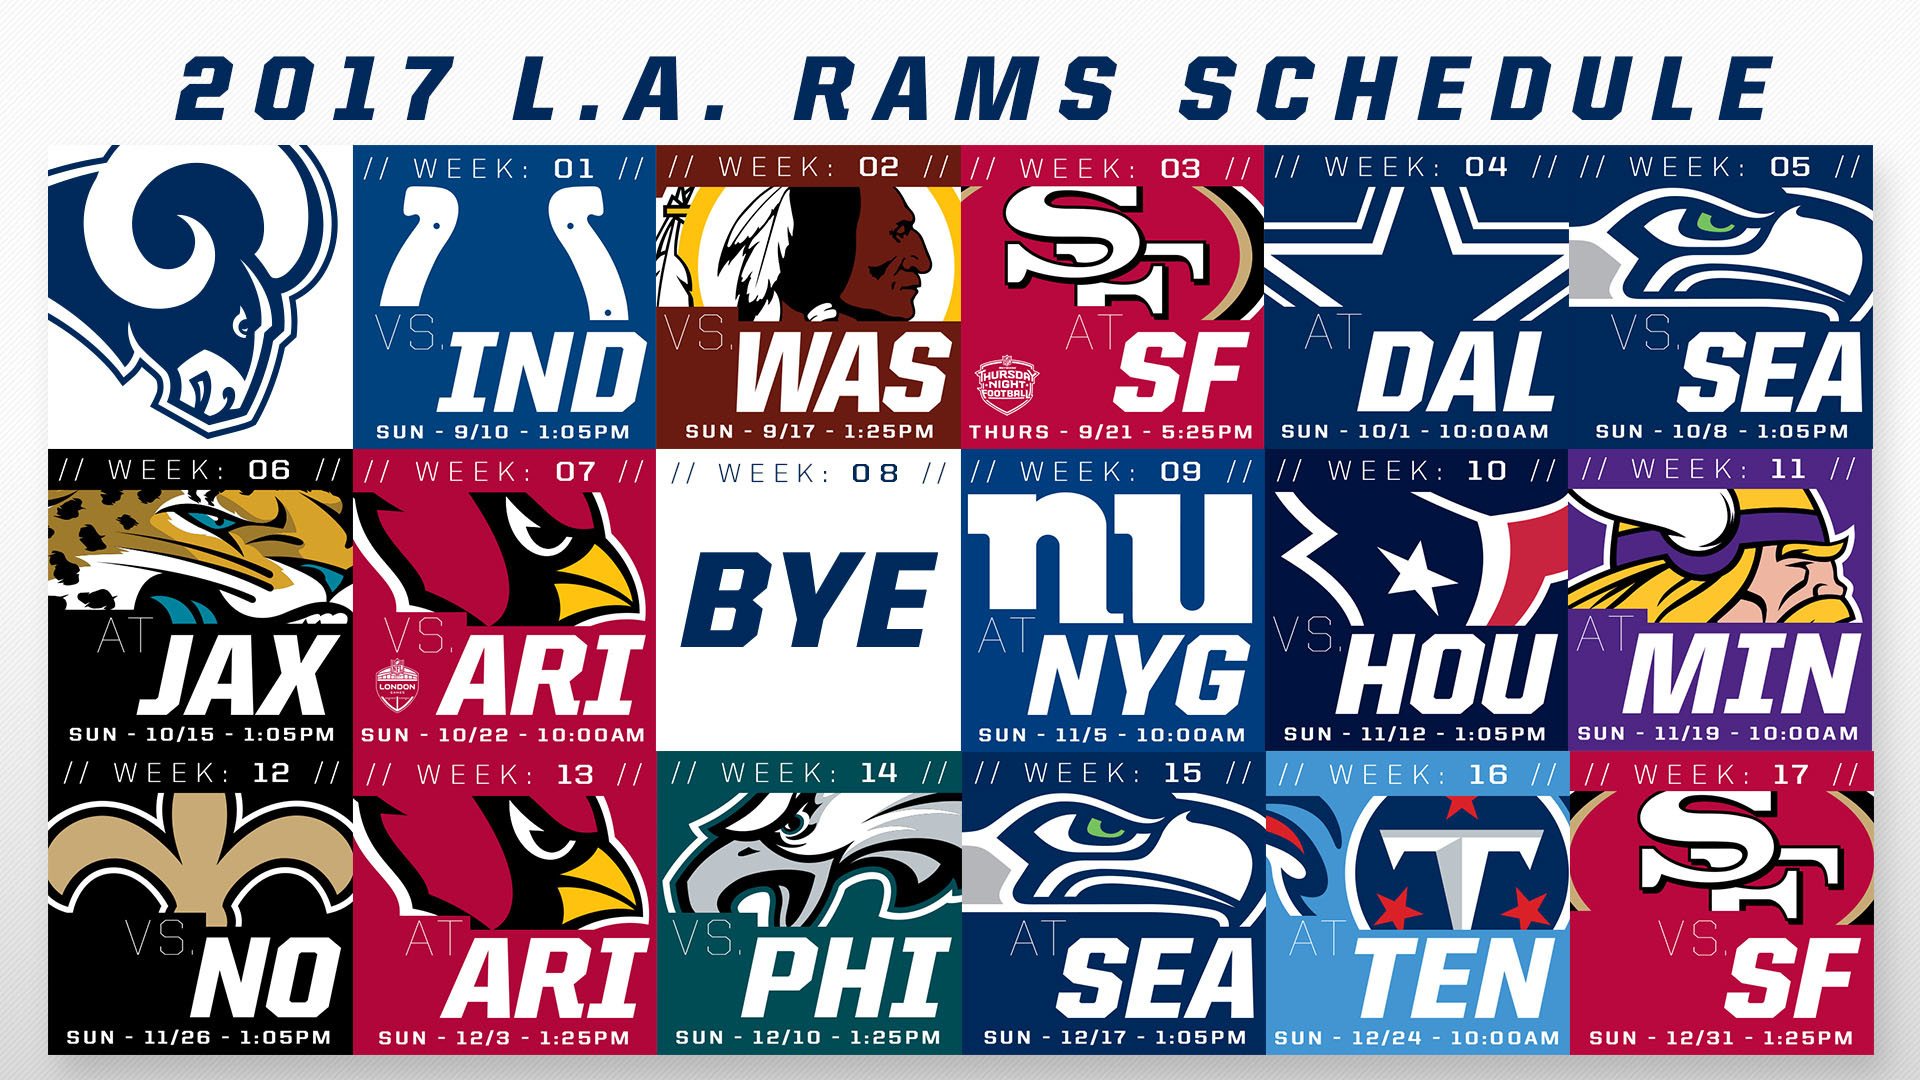 1920x1080 Now that the 2017 Los Angeles Rams schedule is out click to download these  wallpapers for desktop and mobile.